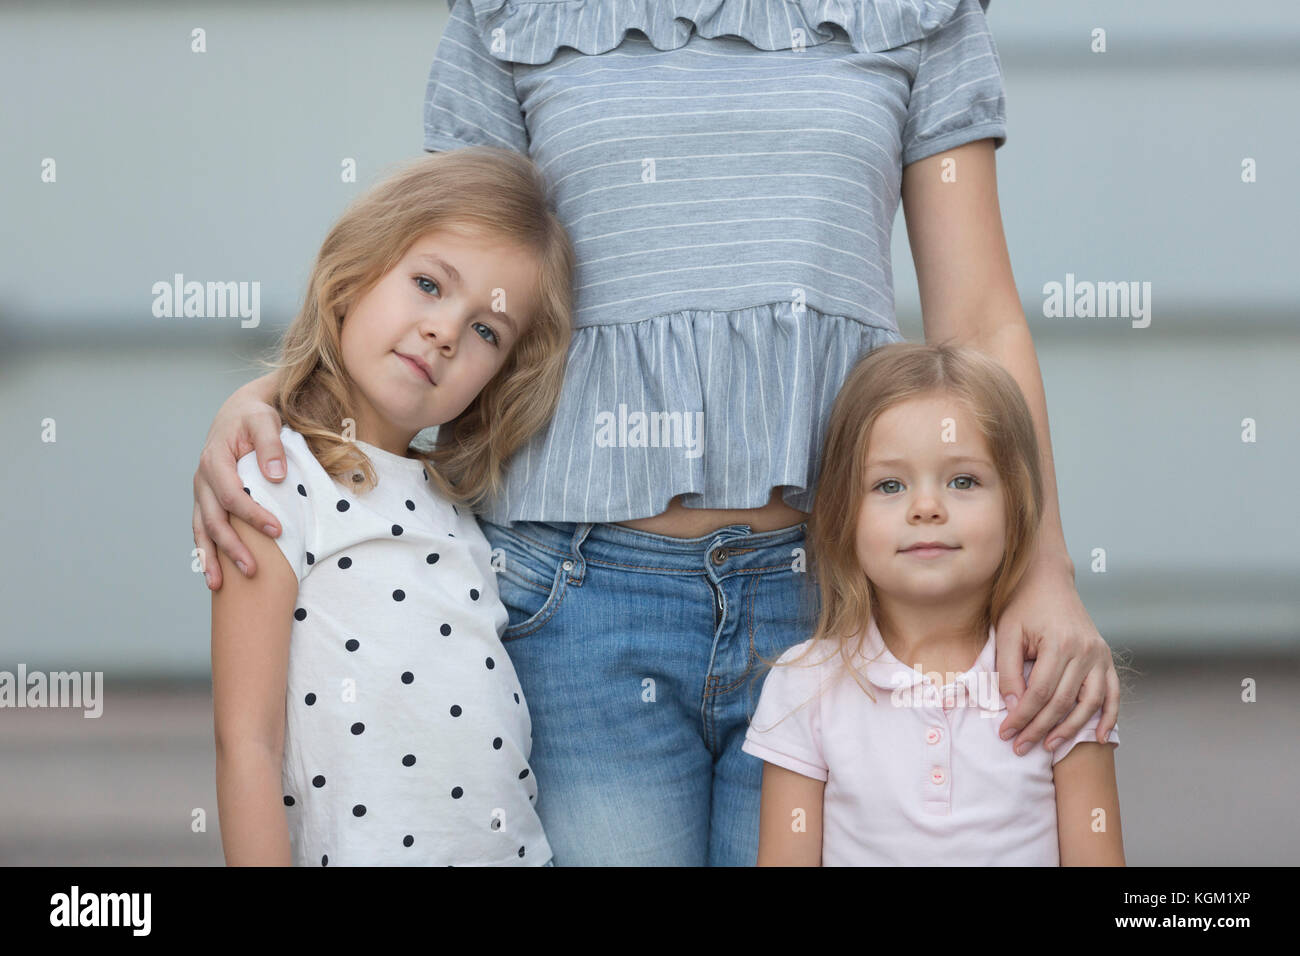 Portrait of girls standing with mother Stock Photo